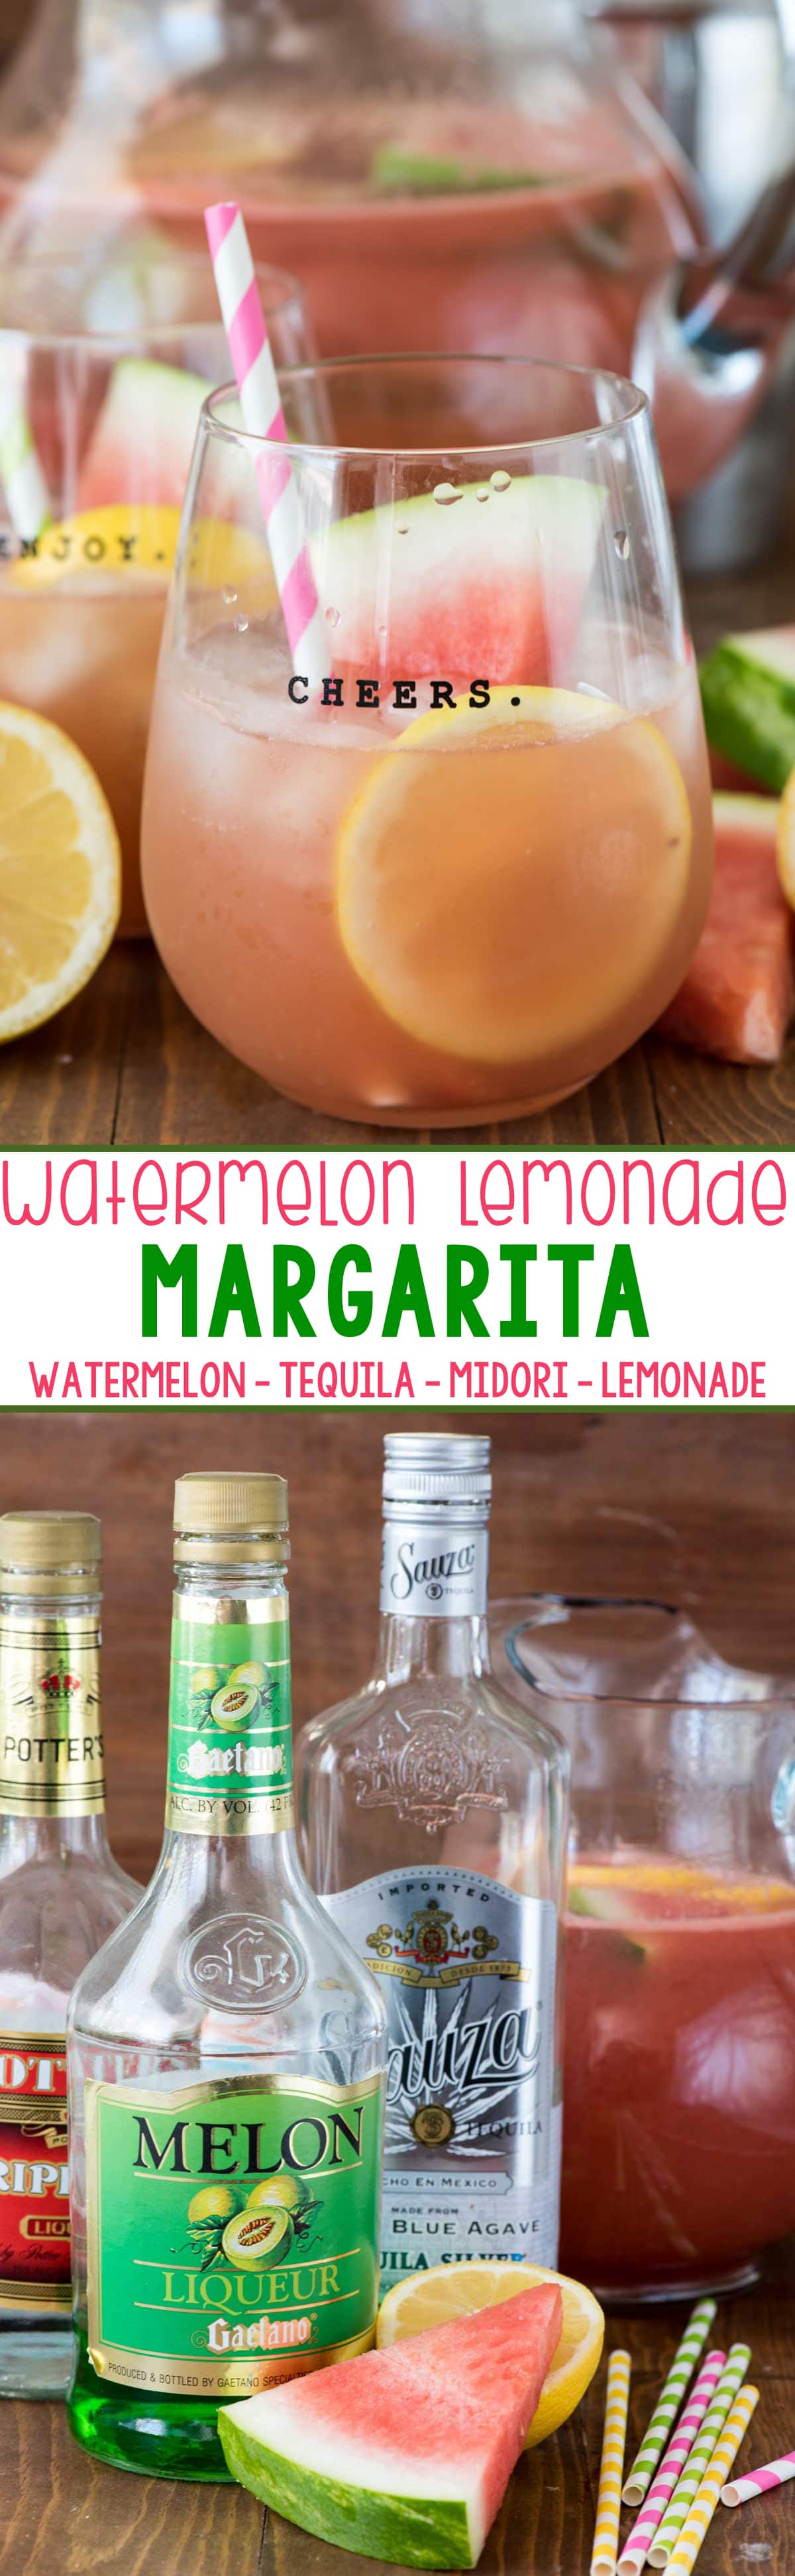 Watermelon Lemonade Margarita - this easy cocktail punch recipe has lemonade mixed with watermelon juice, tequila and midair! Make it for one or a party easily, or make it non-alcoholic for the kids!